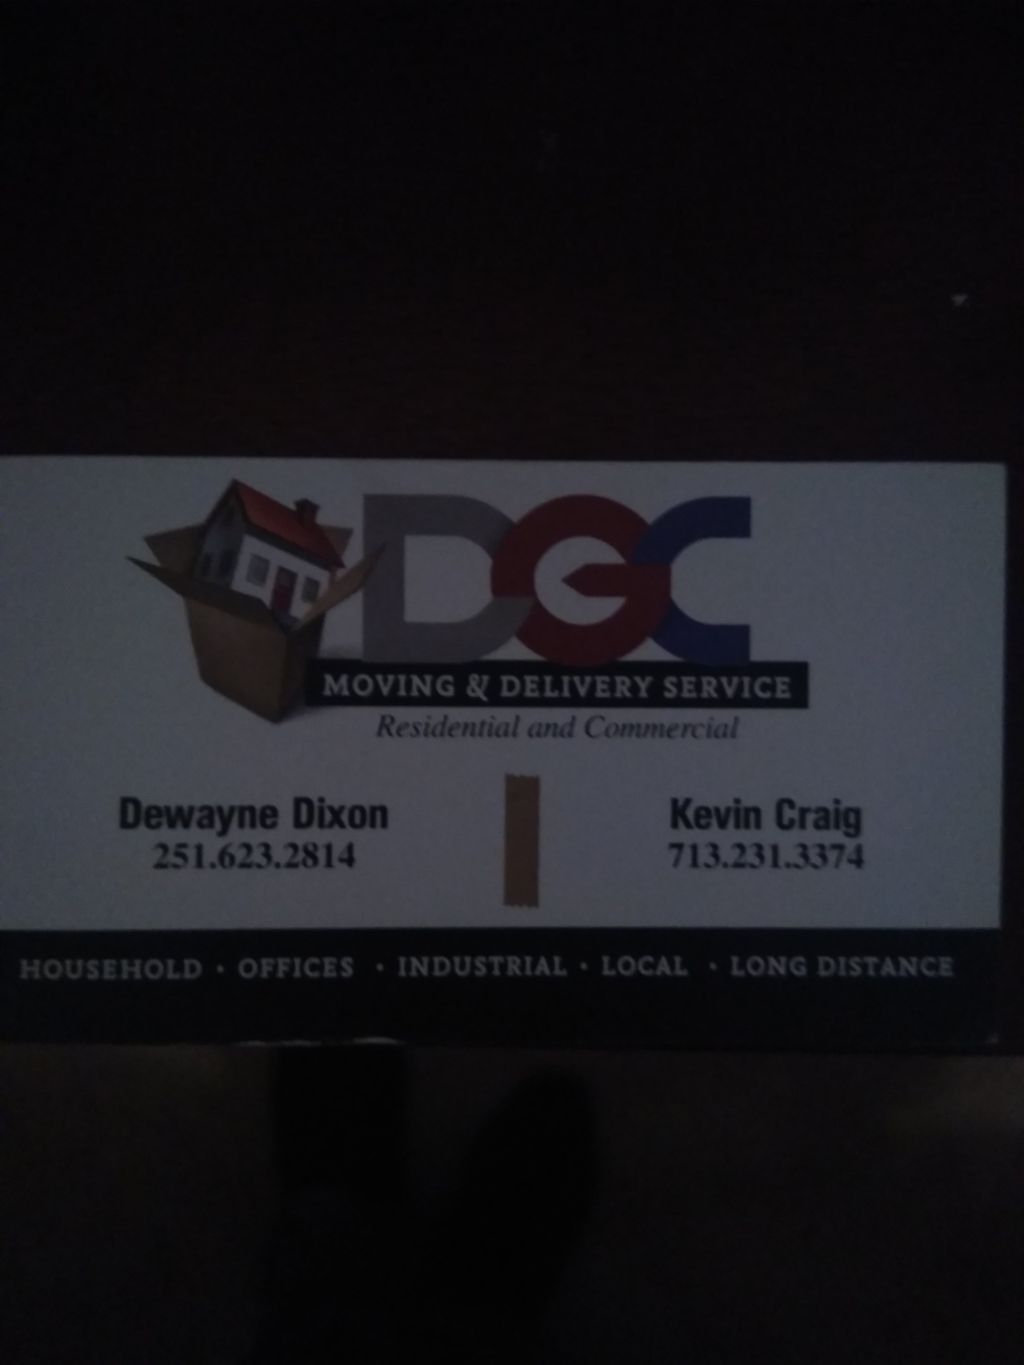 DGC Moving and Delivery Services